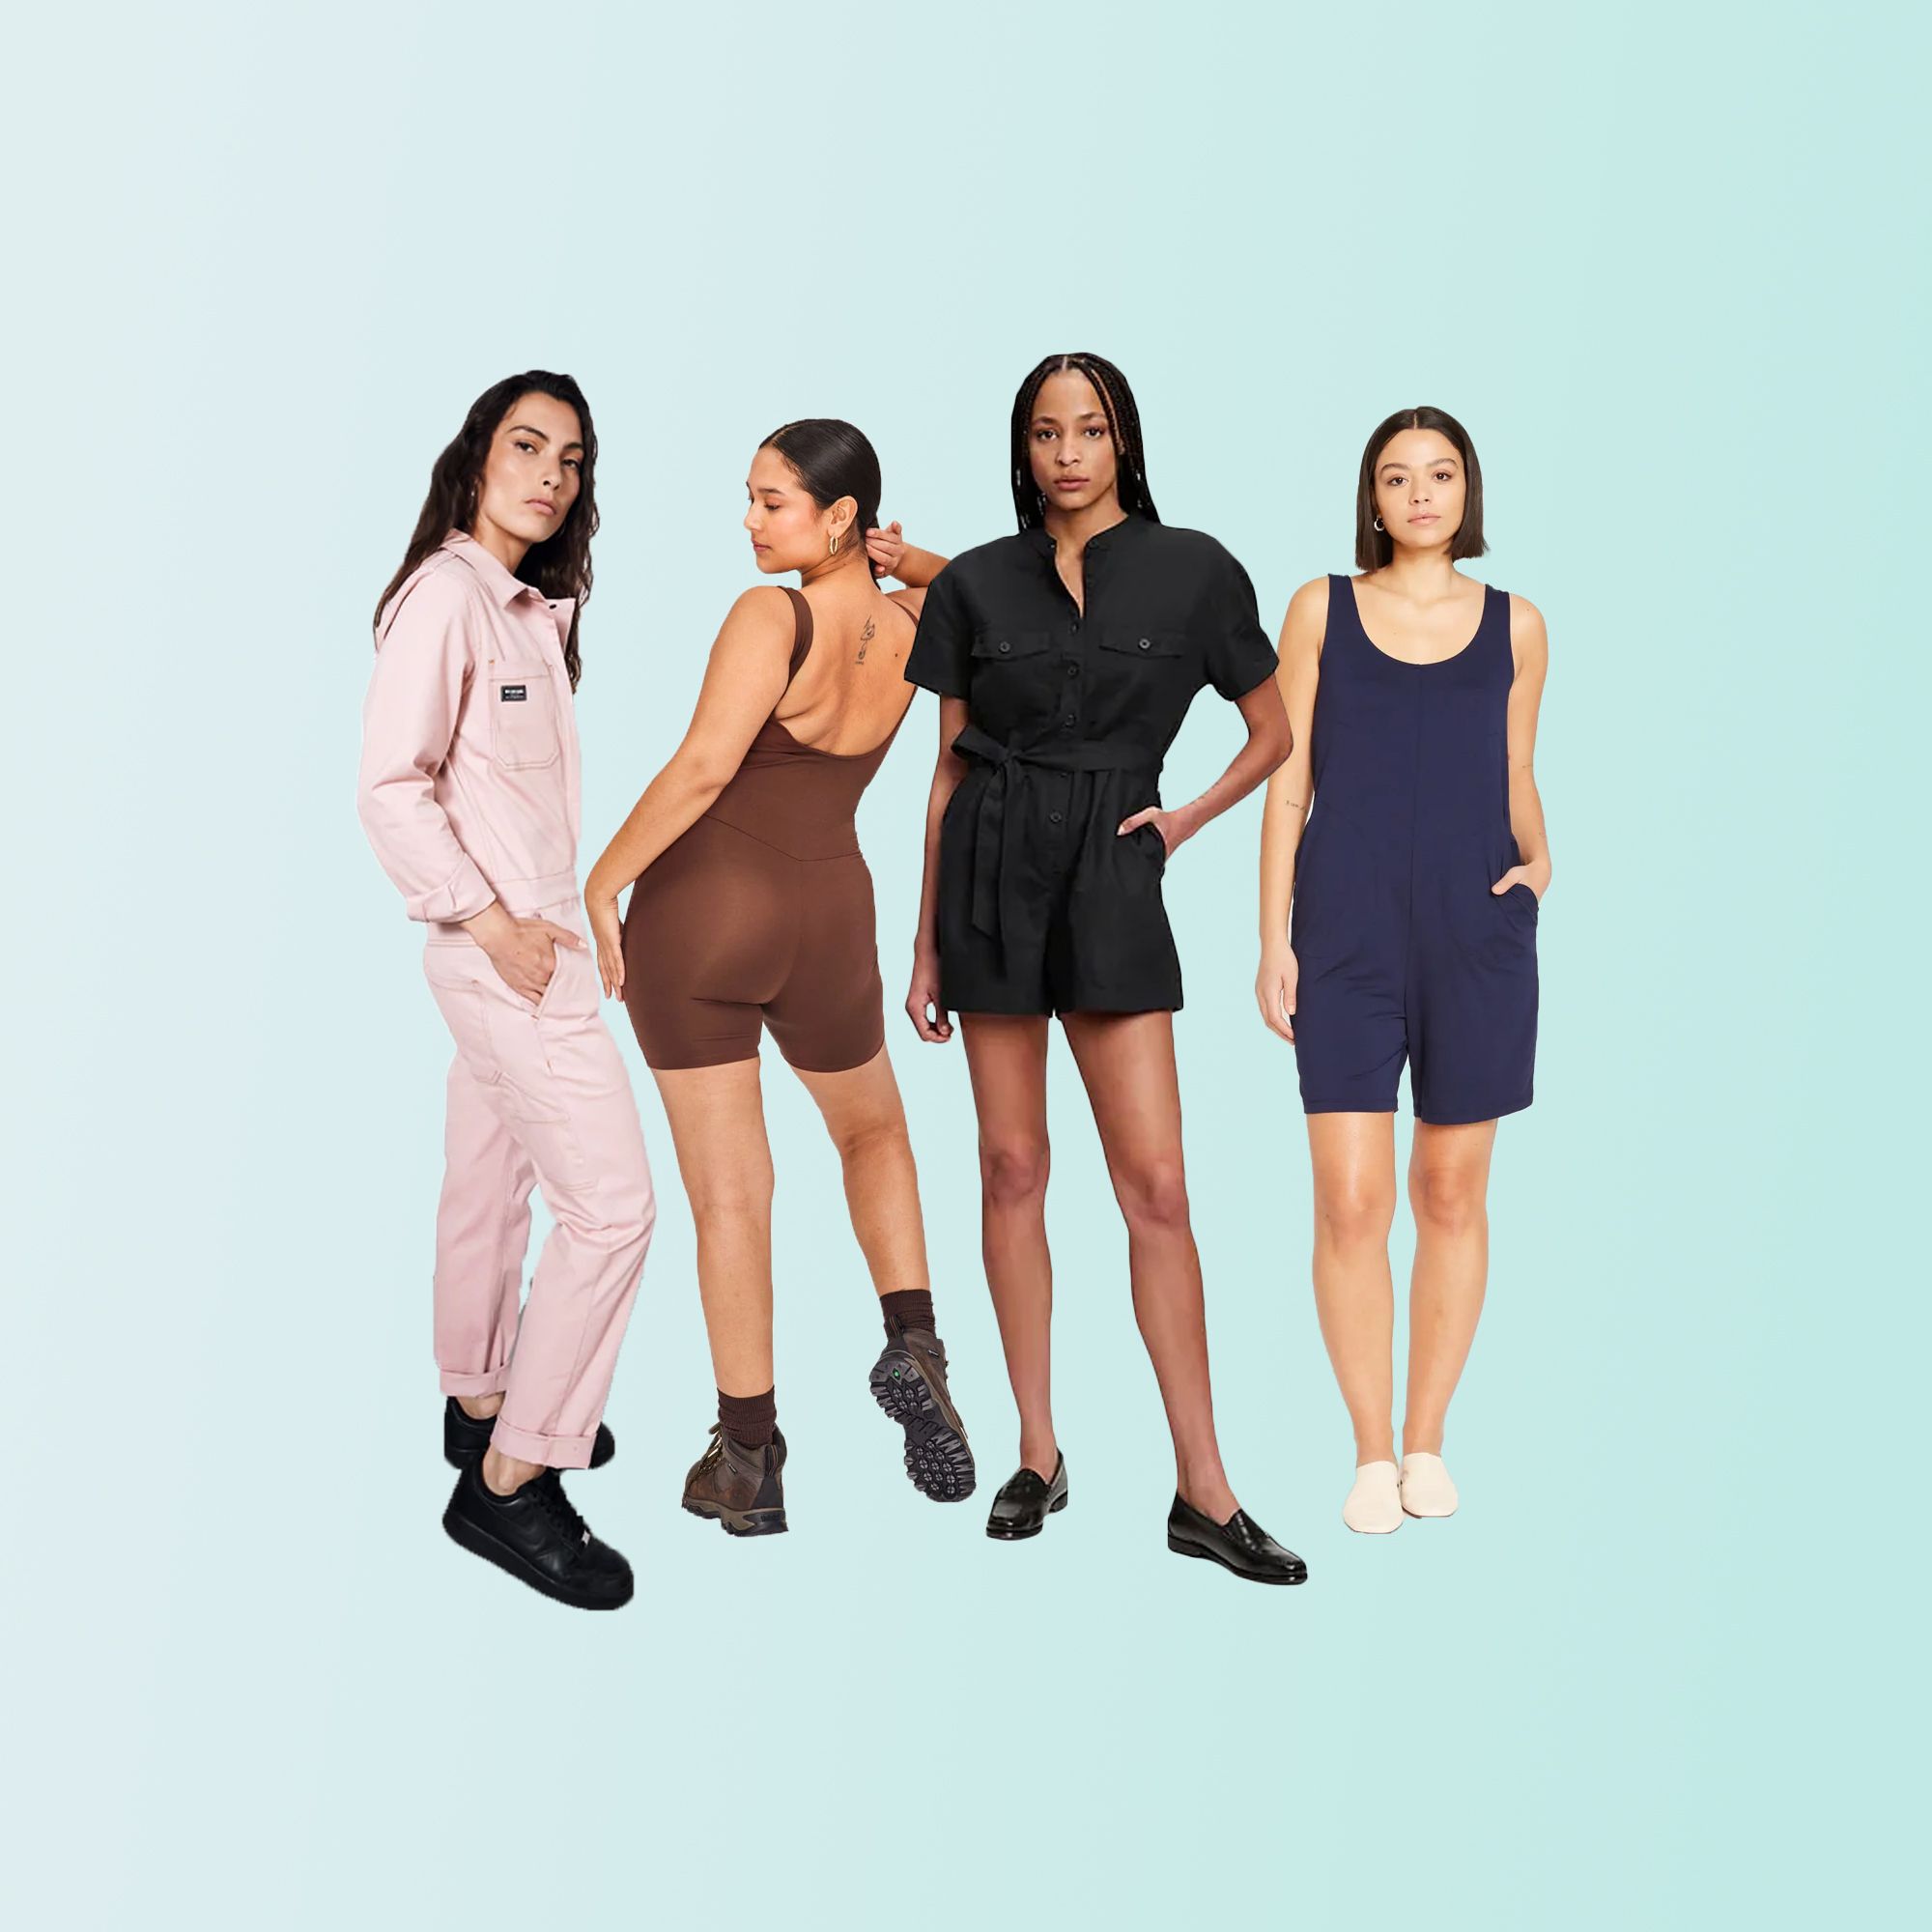 Buy Tall Jumpsuits and Rompers | SeamsFriendly